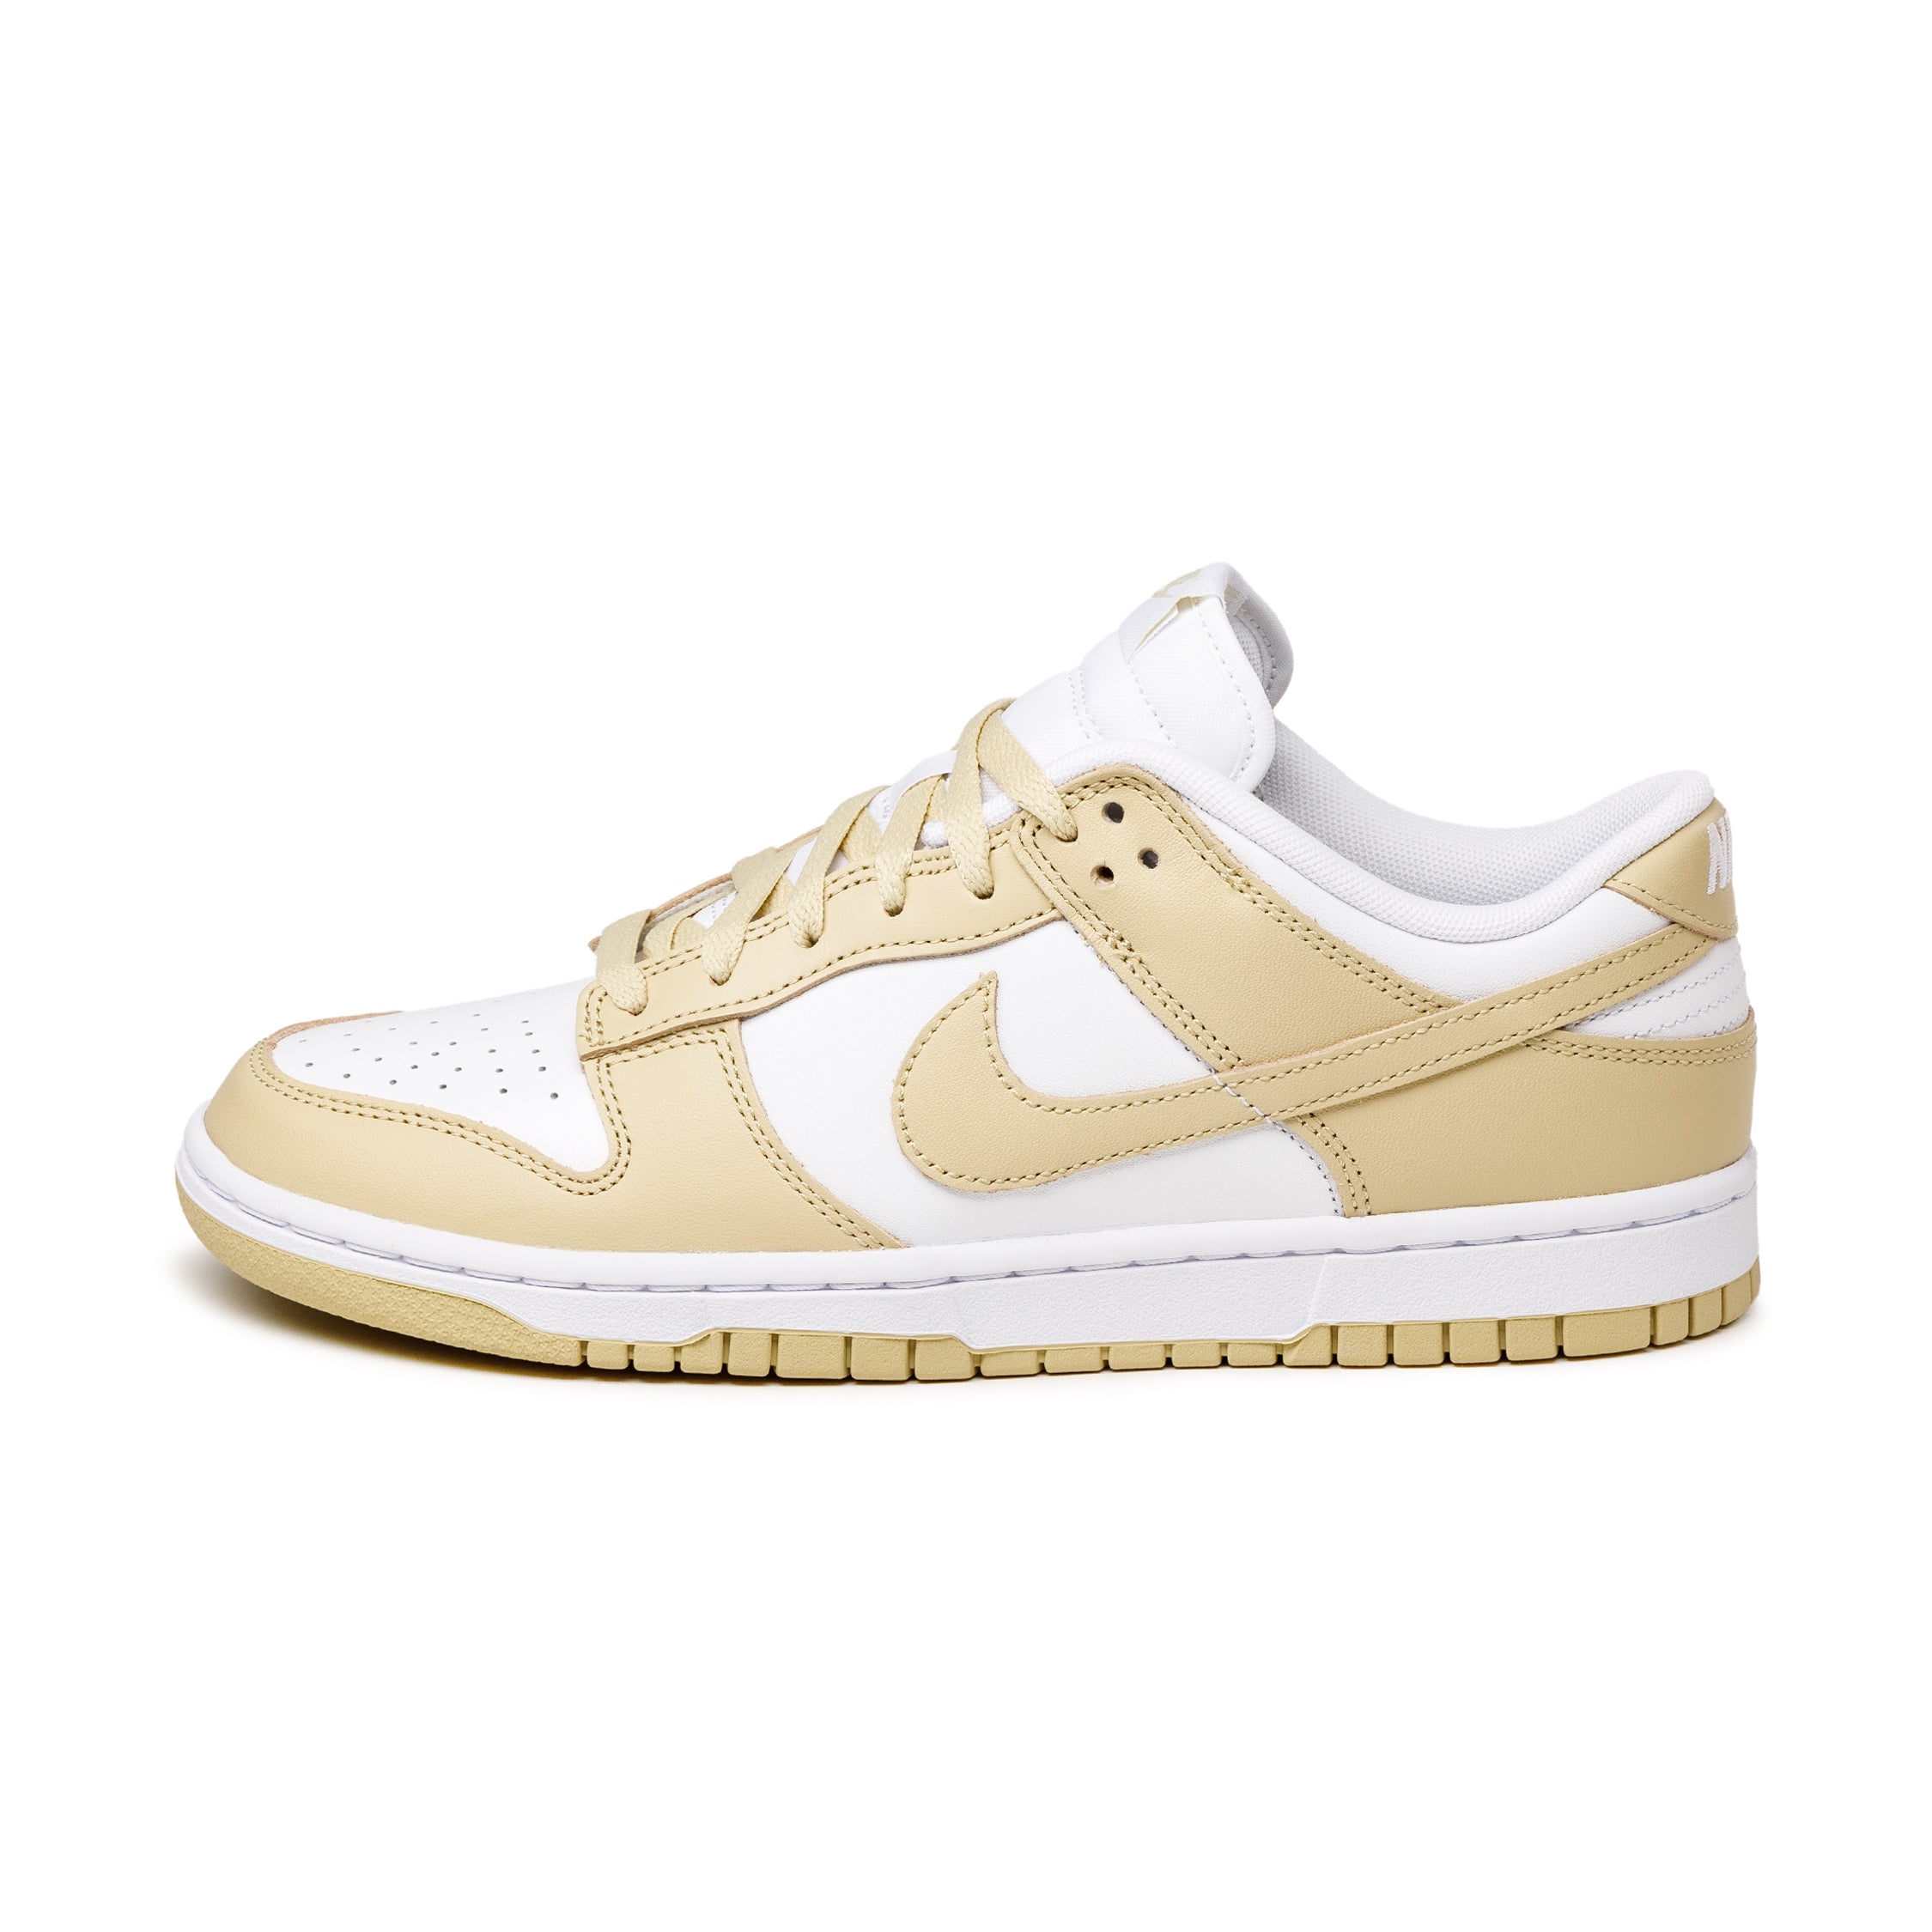 Nike Dunk Low Retro *Team Gold* » Buy online now!